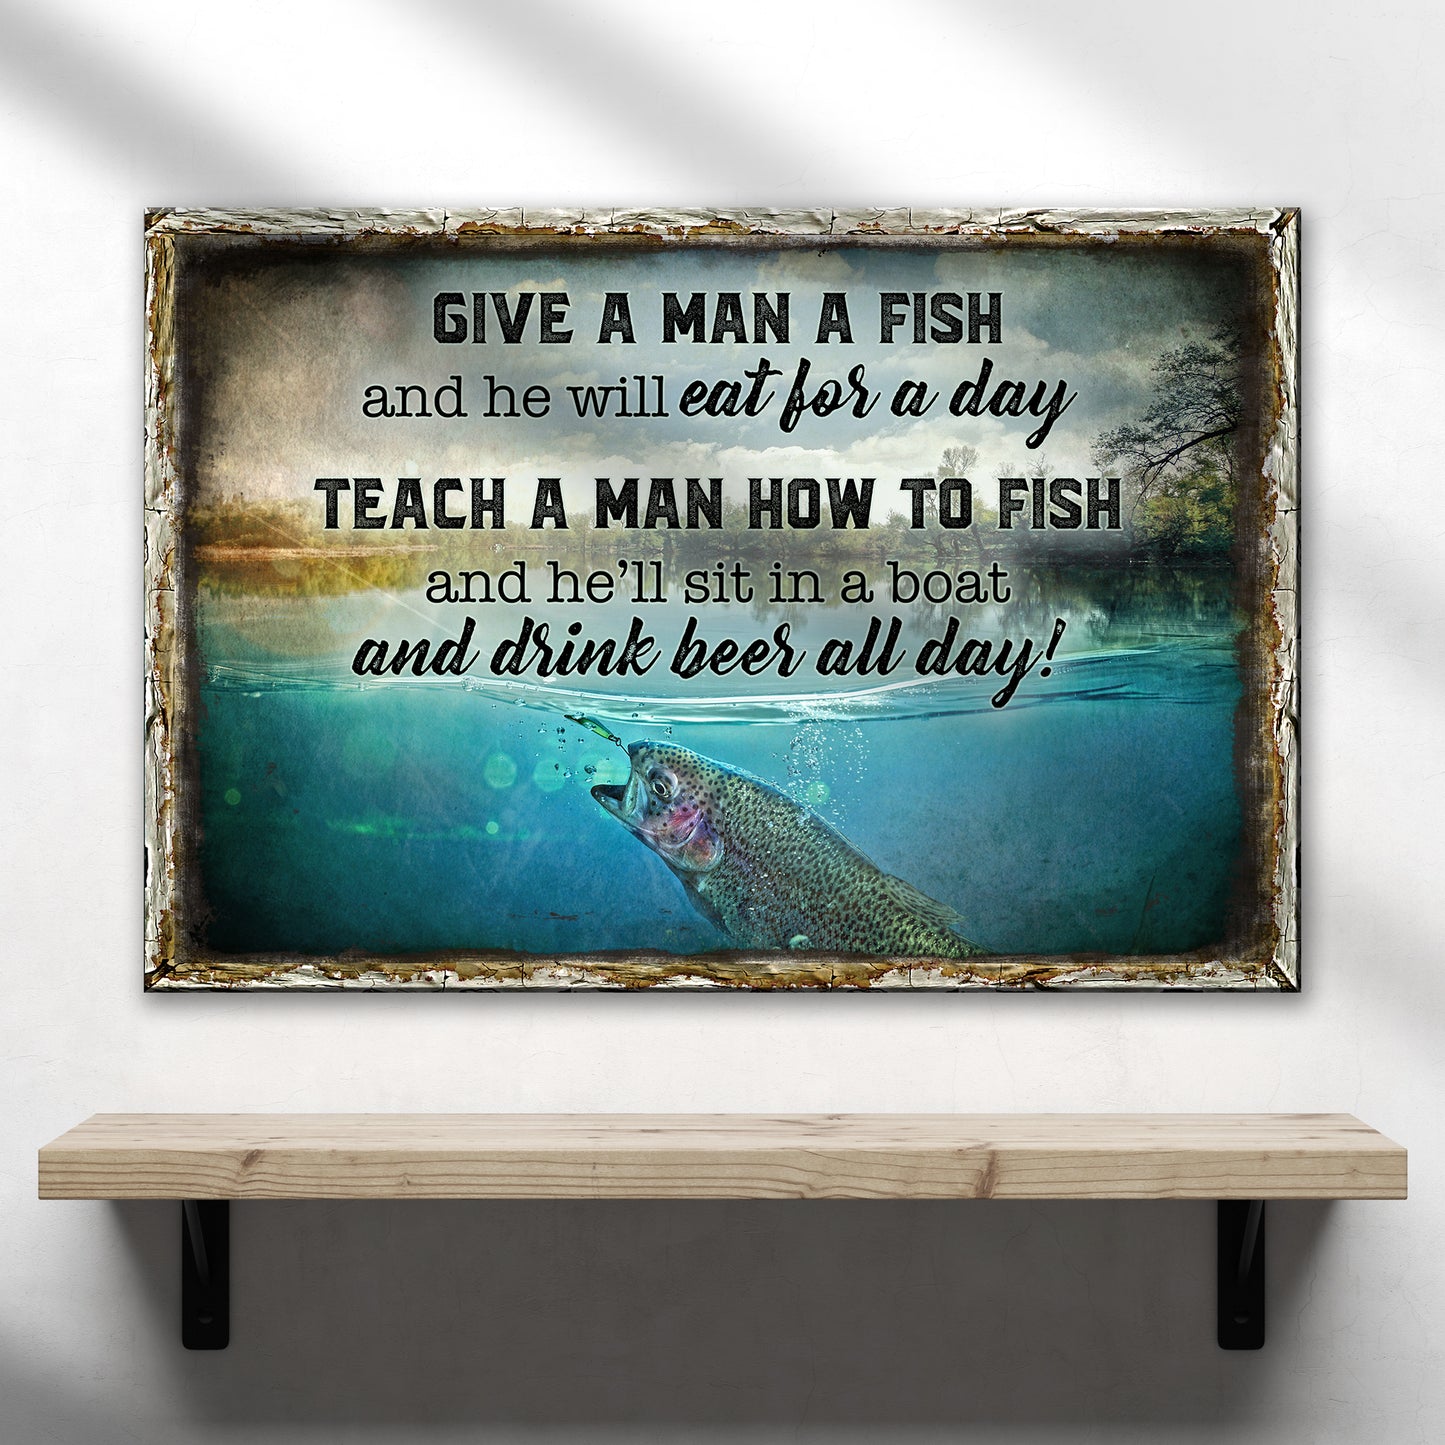 Teach A Man How To Fish And He'll Sit In A Boat And Drink Beer All Day Sign - Image by Tailored Canvases